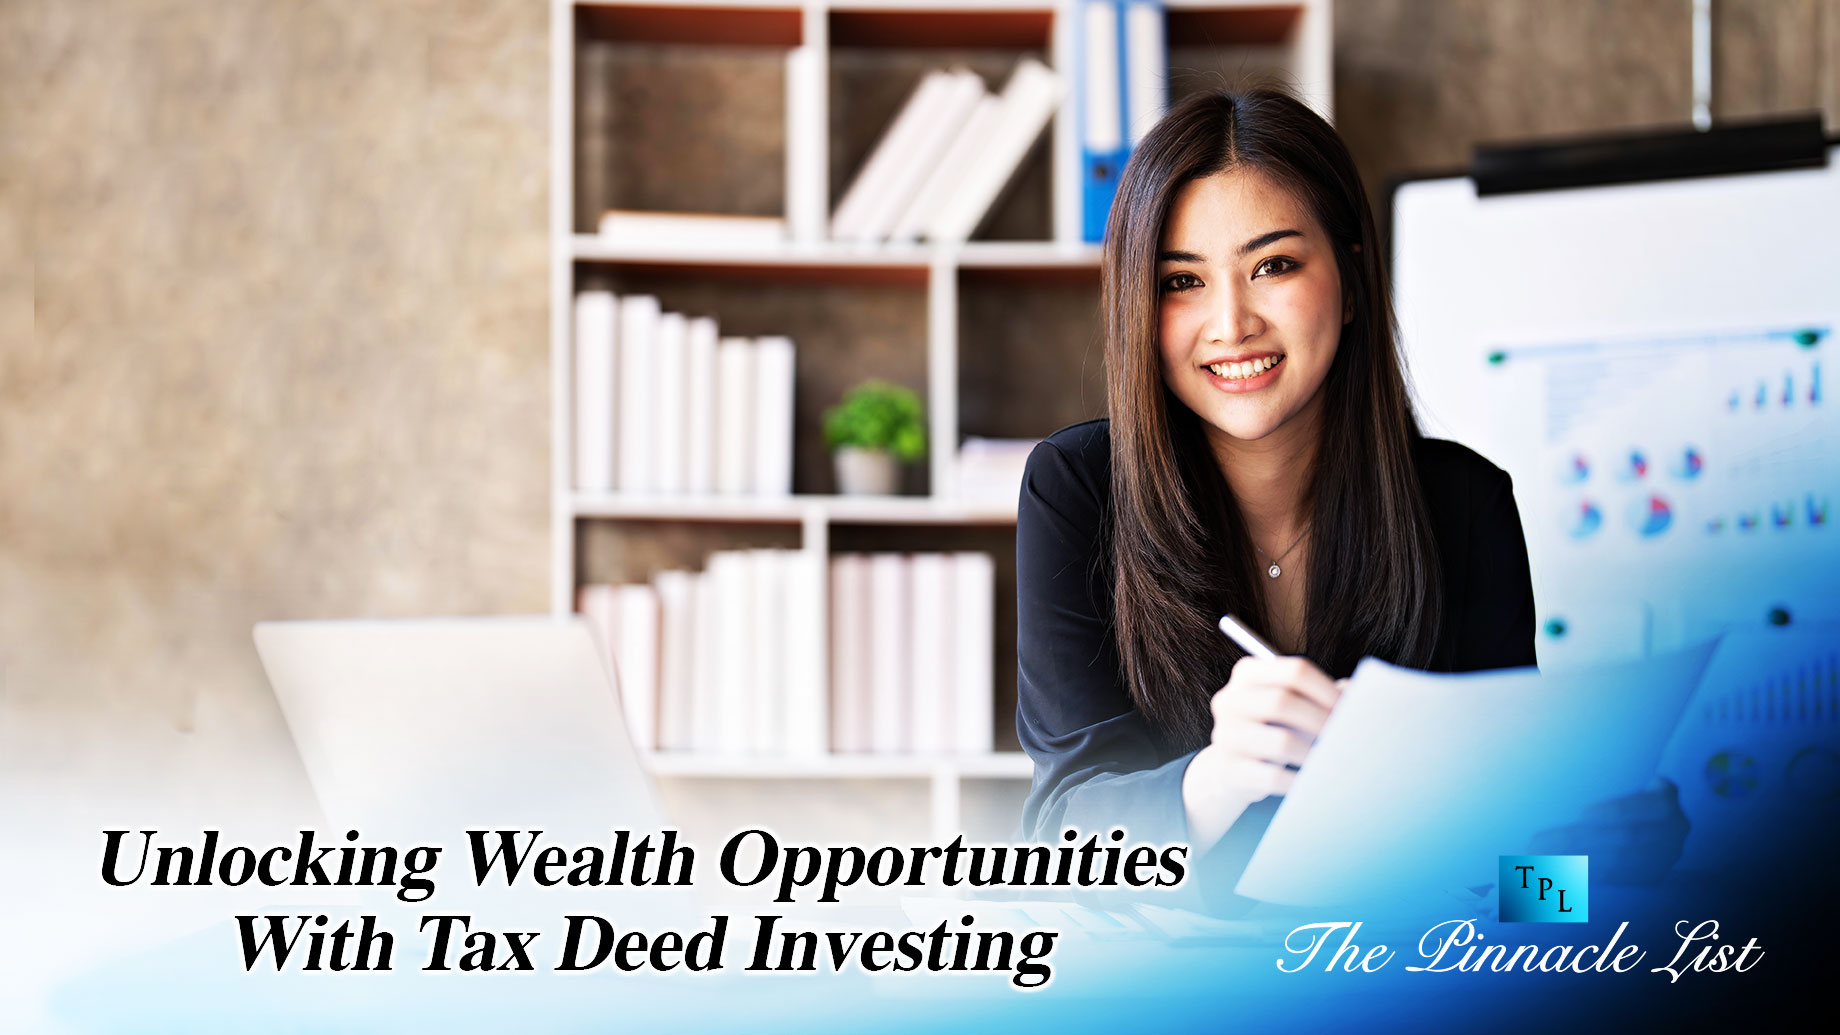 Unlocking Wealth Opportunities With Tax Deed Investing